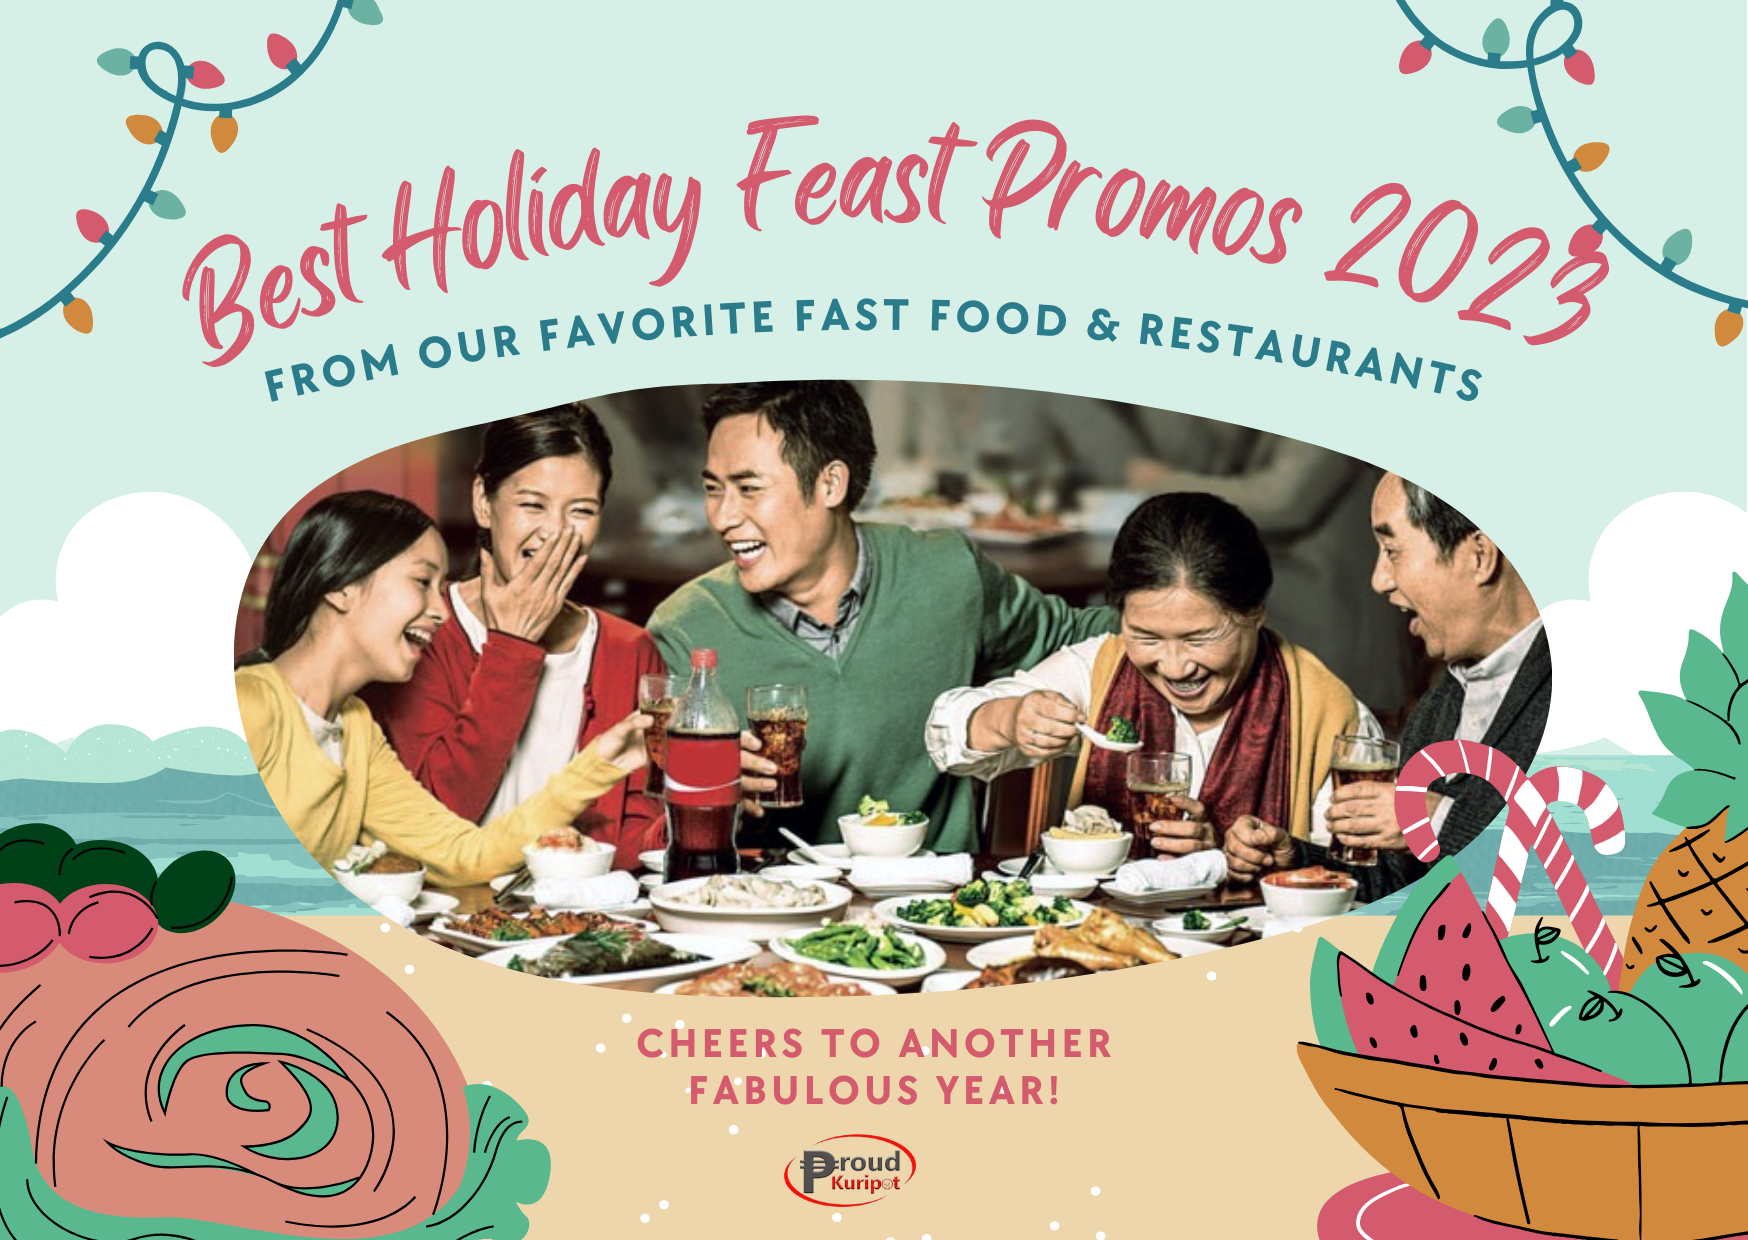 Best Holiday Feast Promos 2022